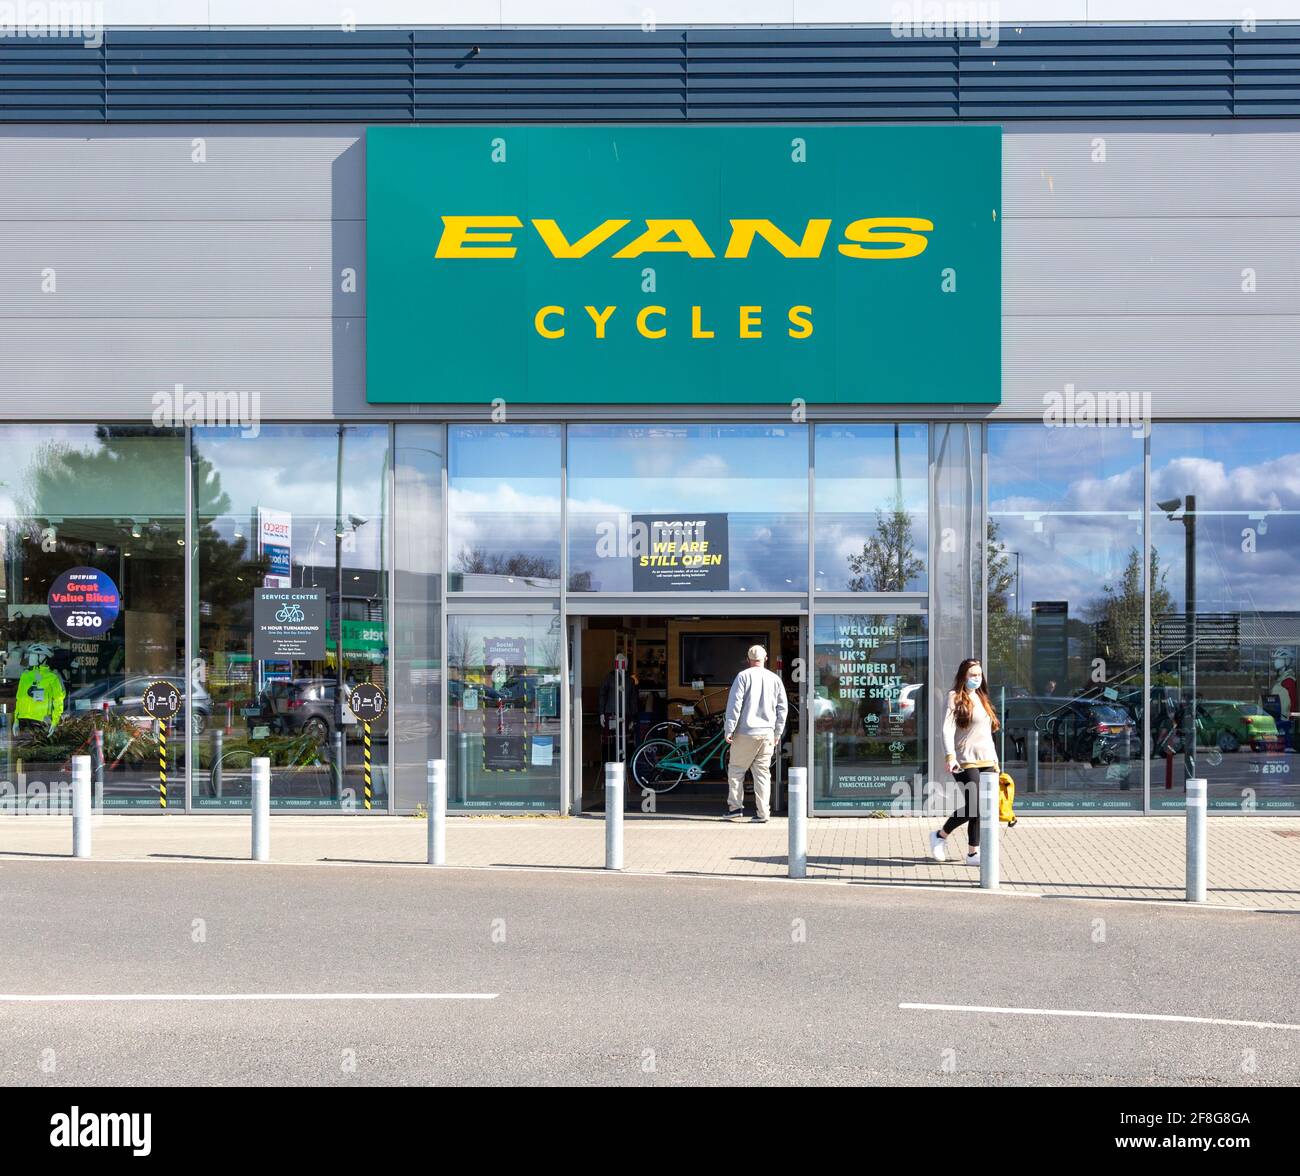 evans cycles servicing